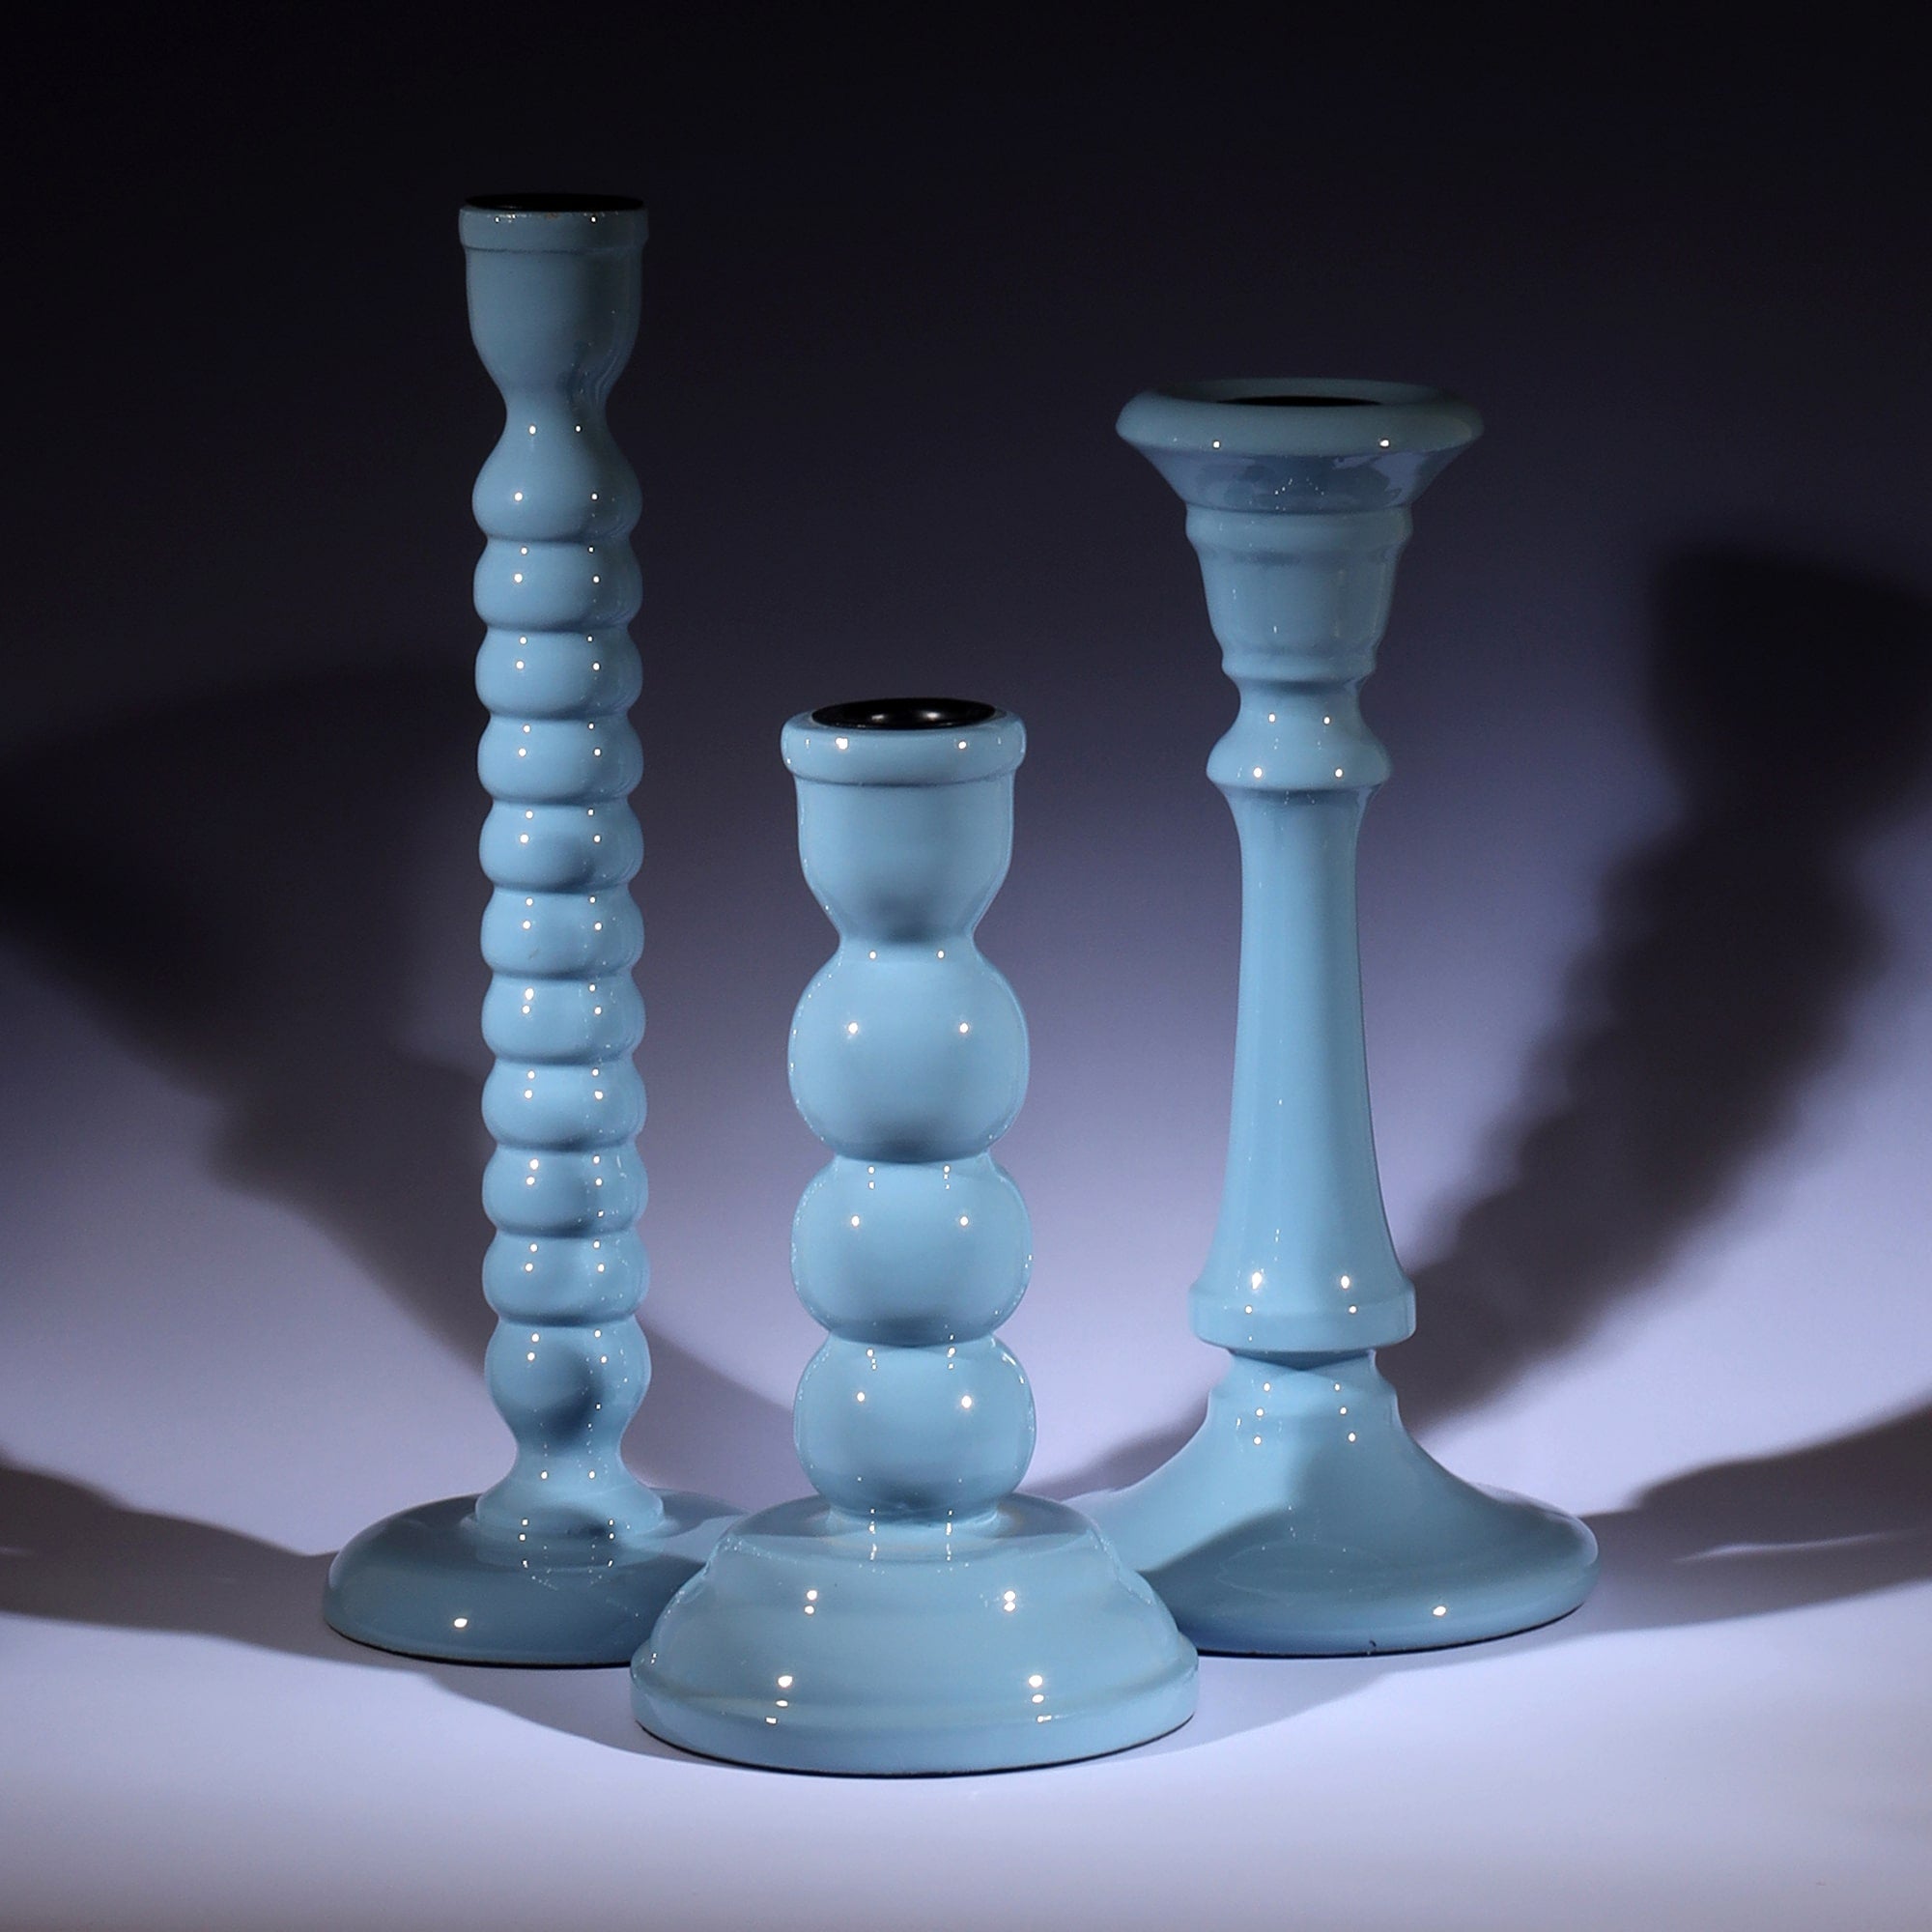 Powder Blue Candle holder collection in Breeze,Tidal and Drift.